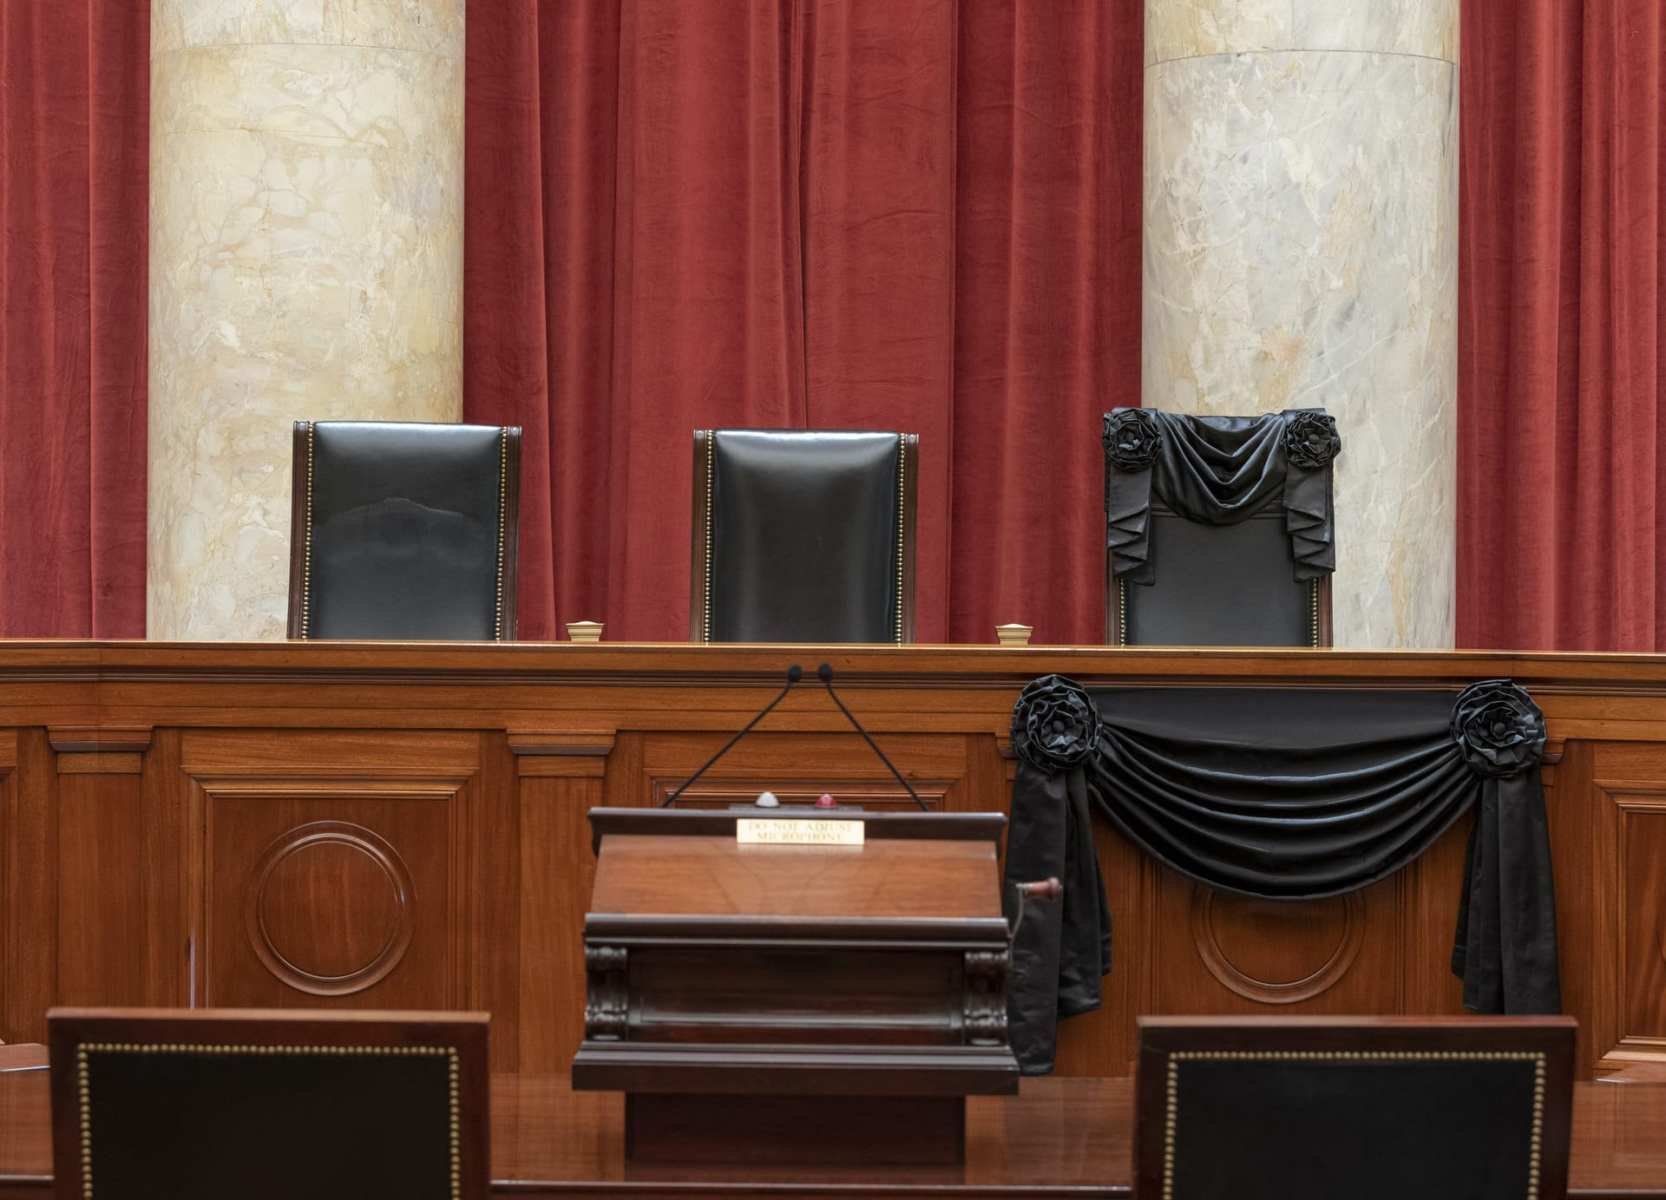 The bench at the U.S. Supreme Court draped in black.